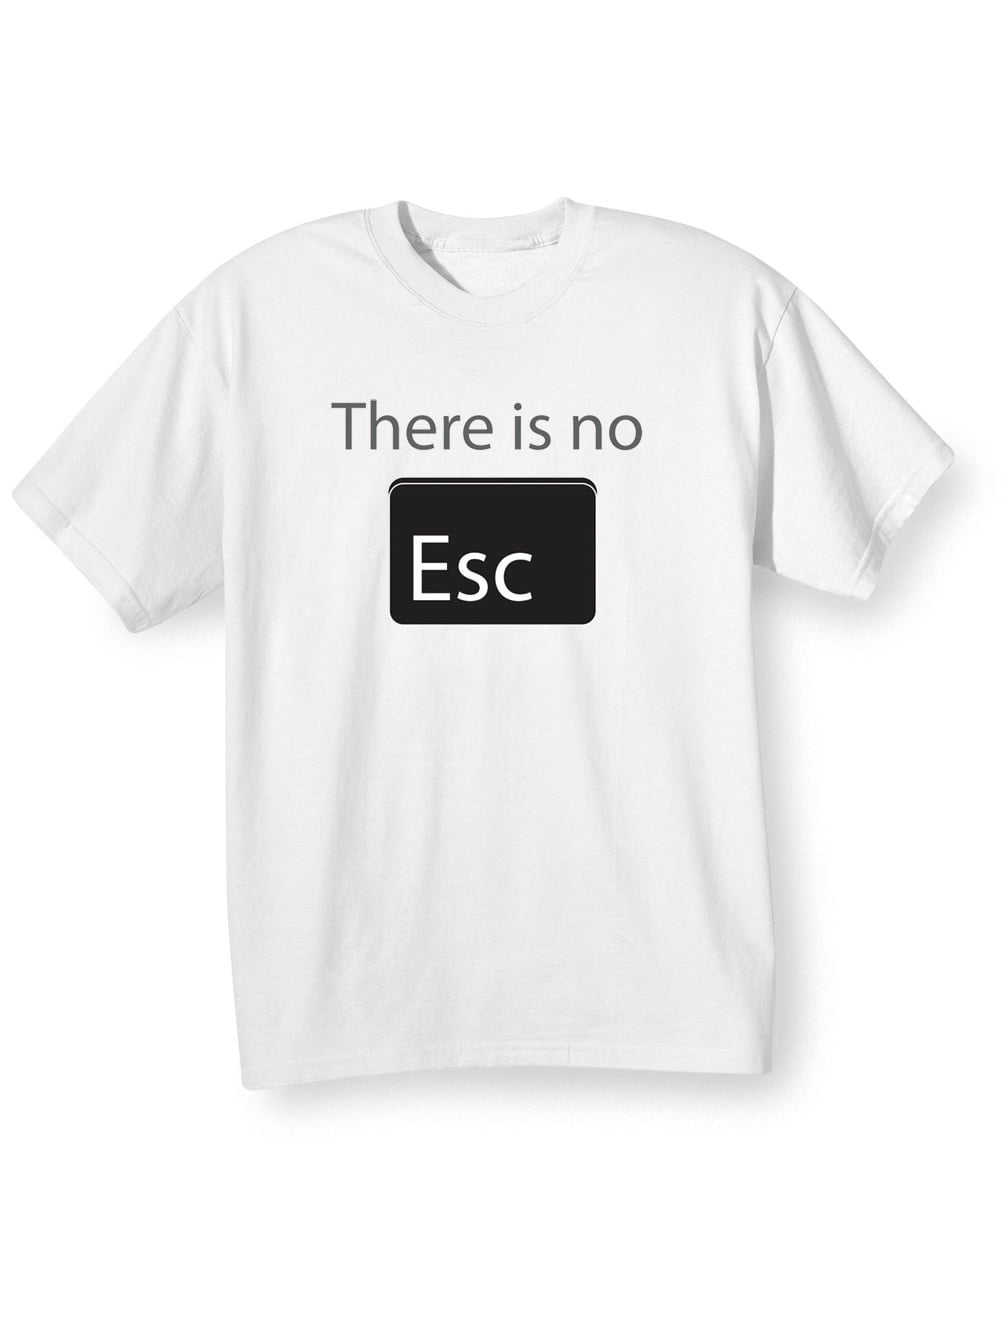 WHAT ON EARTH - Unisex Adult There is No Esc White T-Shirt